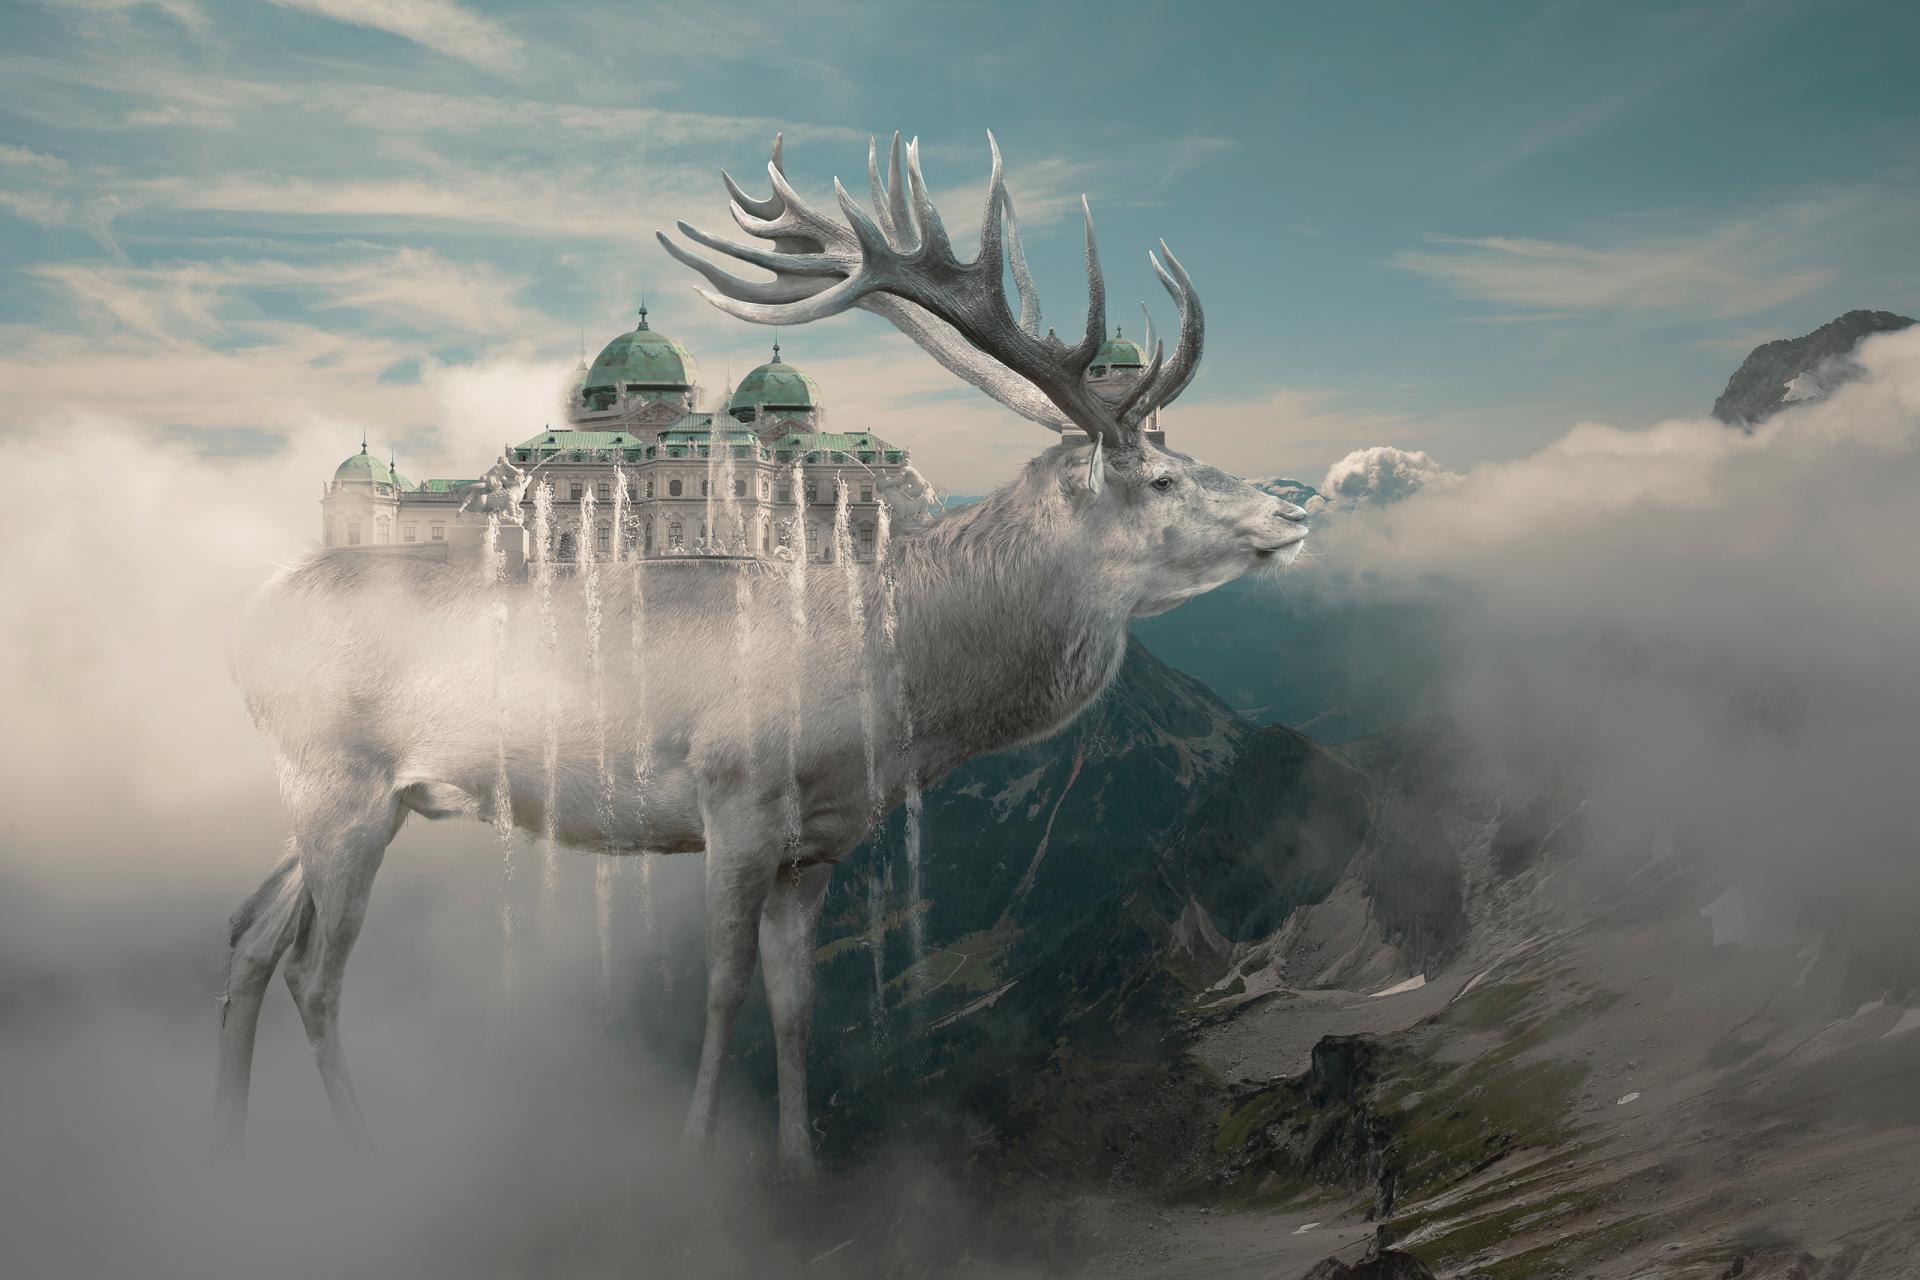 European Photography Awards Winner - A Kingdom Amongst The Clouds